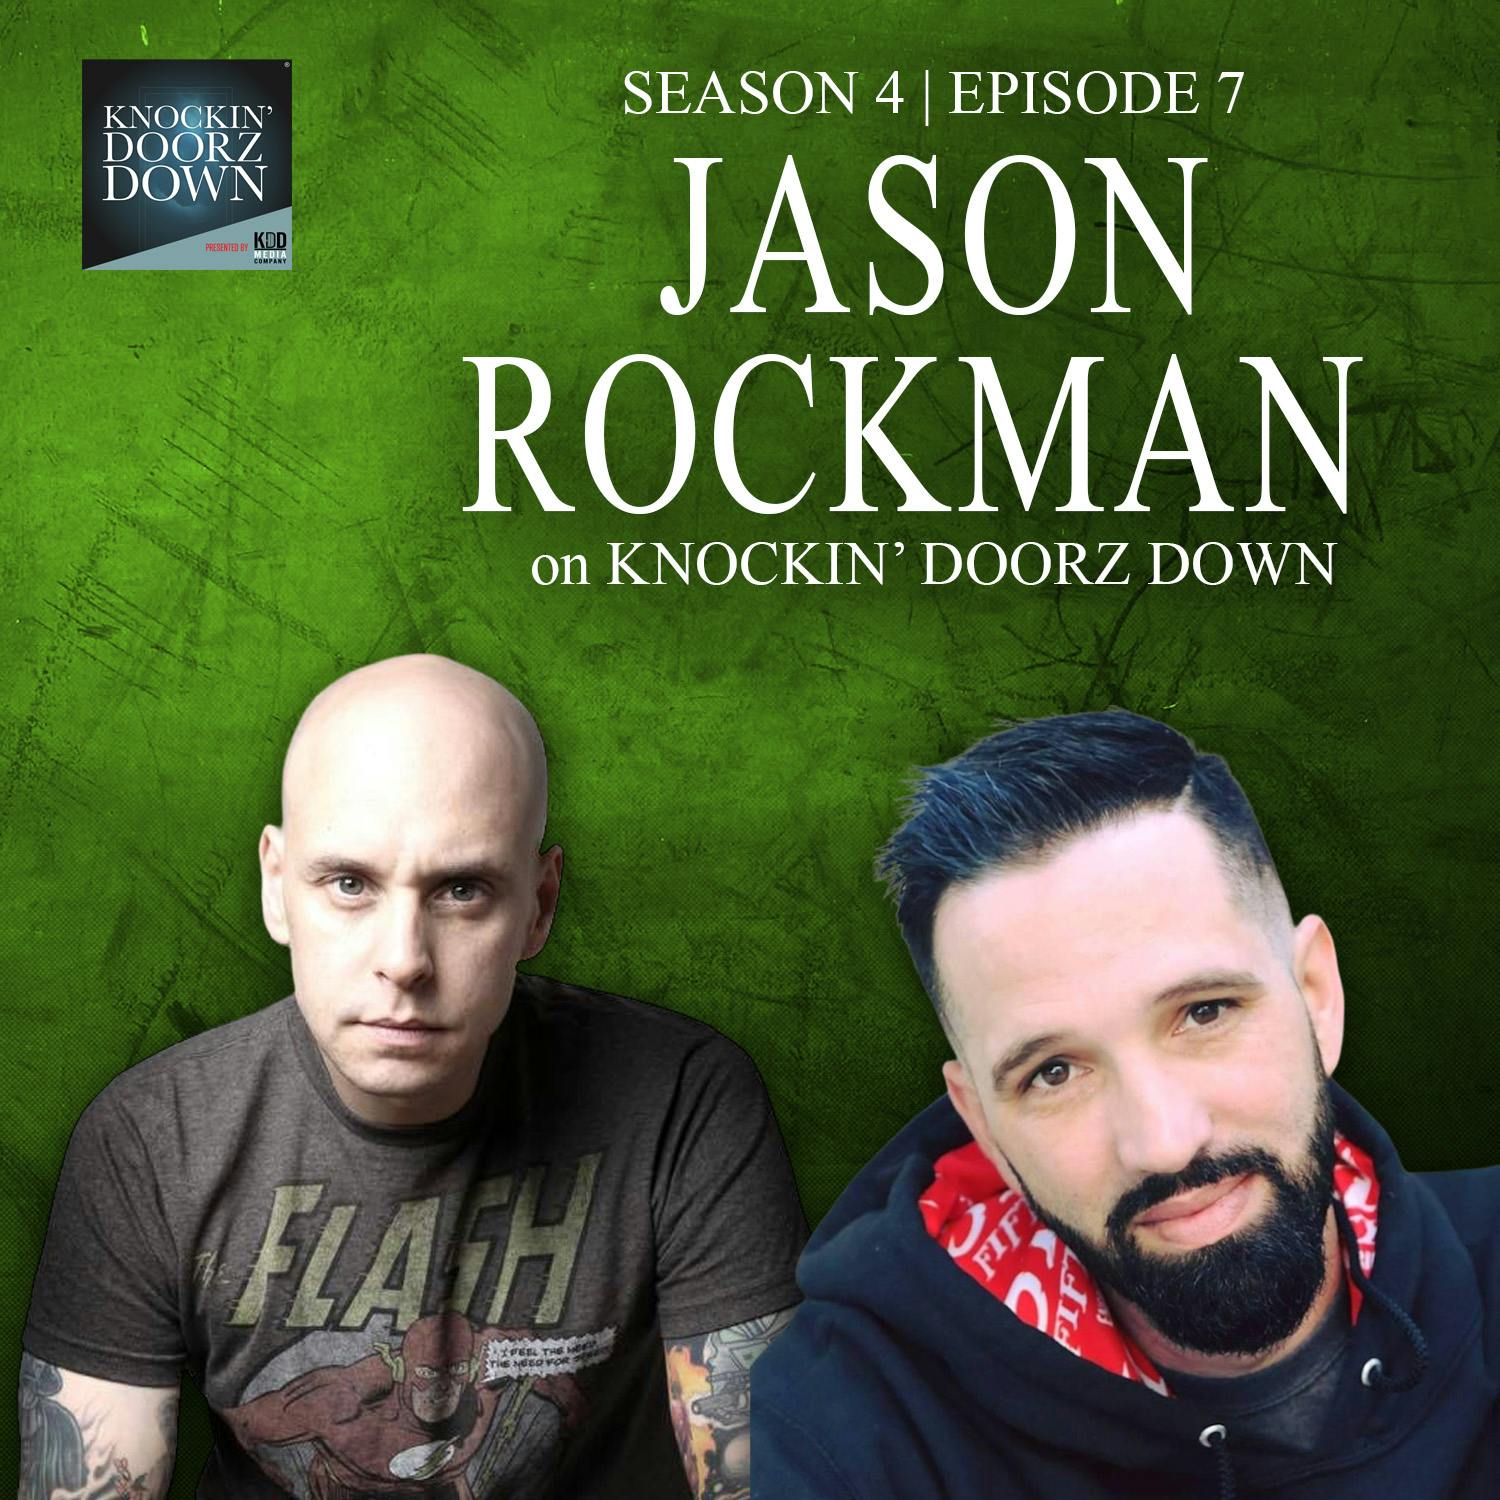 Jason Rockman | Sobriety In Early 20’s, Touring Musician, Radio DJ, Combat Sports, Comic Cons, Rock Music Festivals And Hope